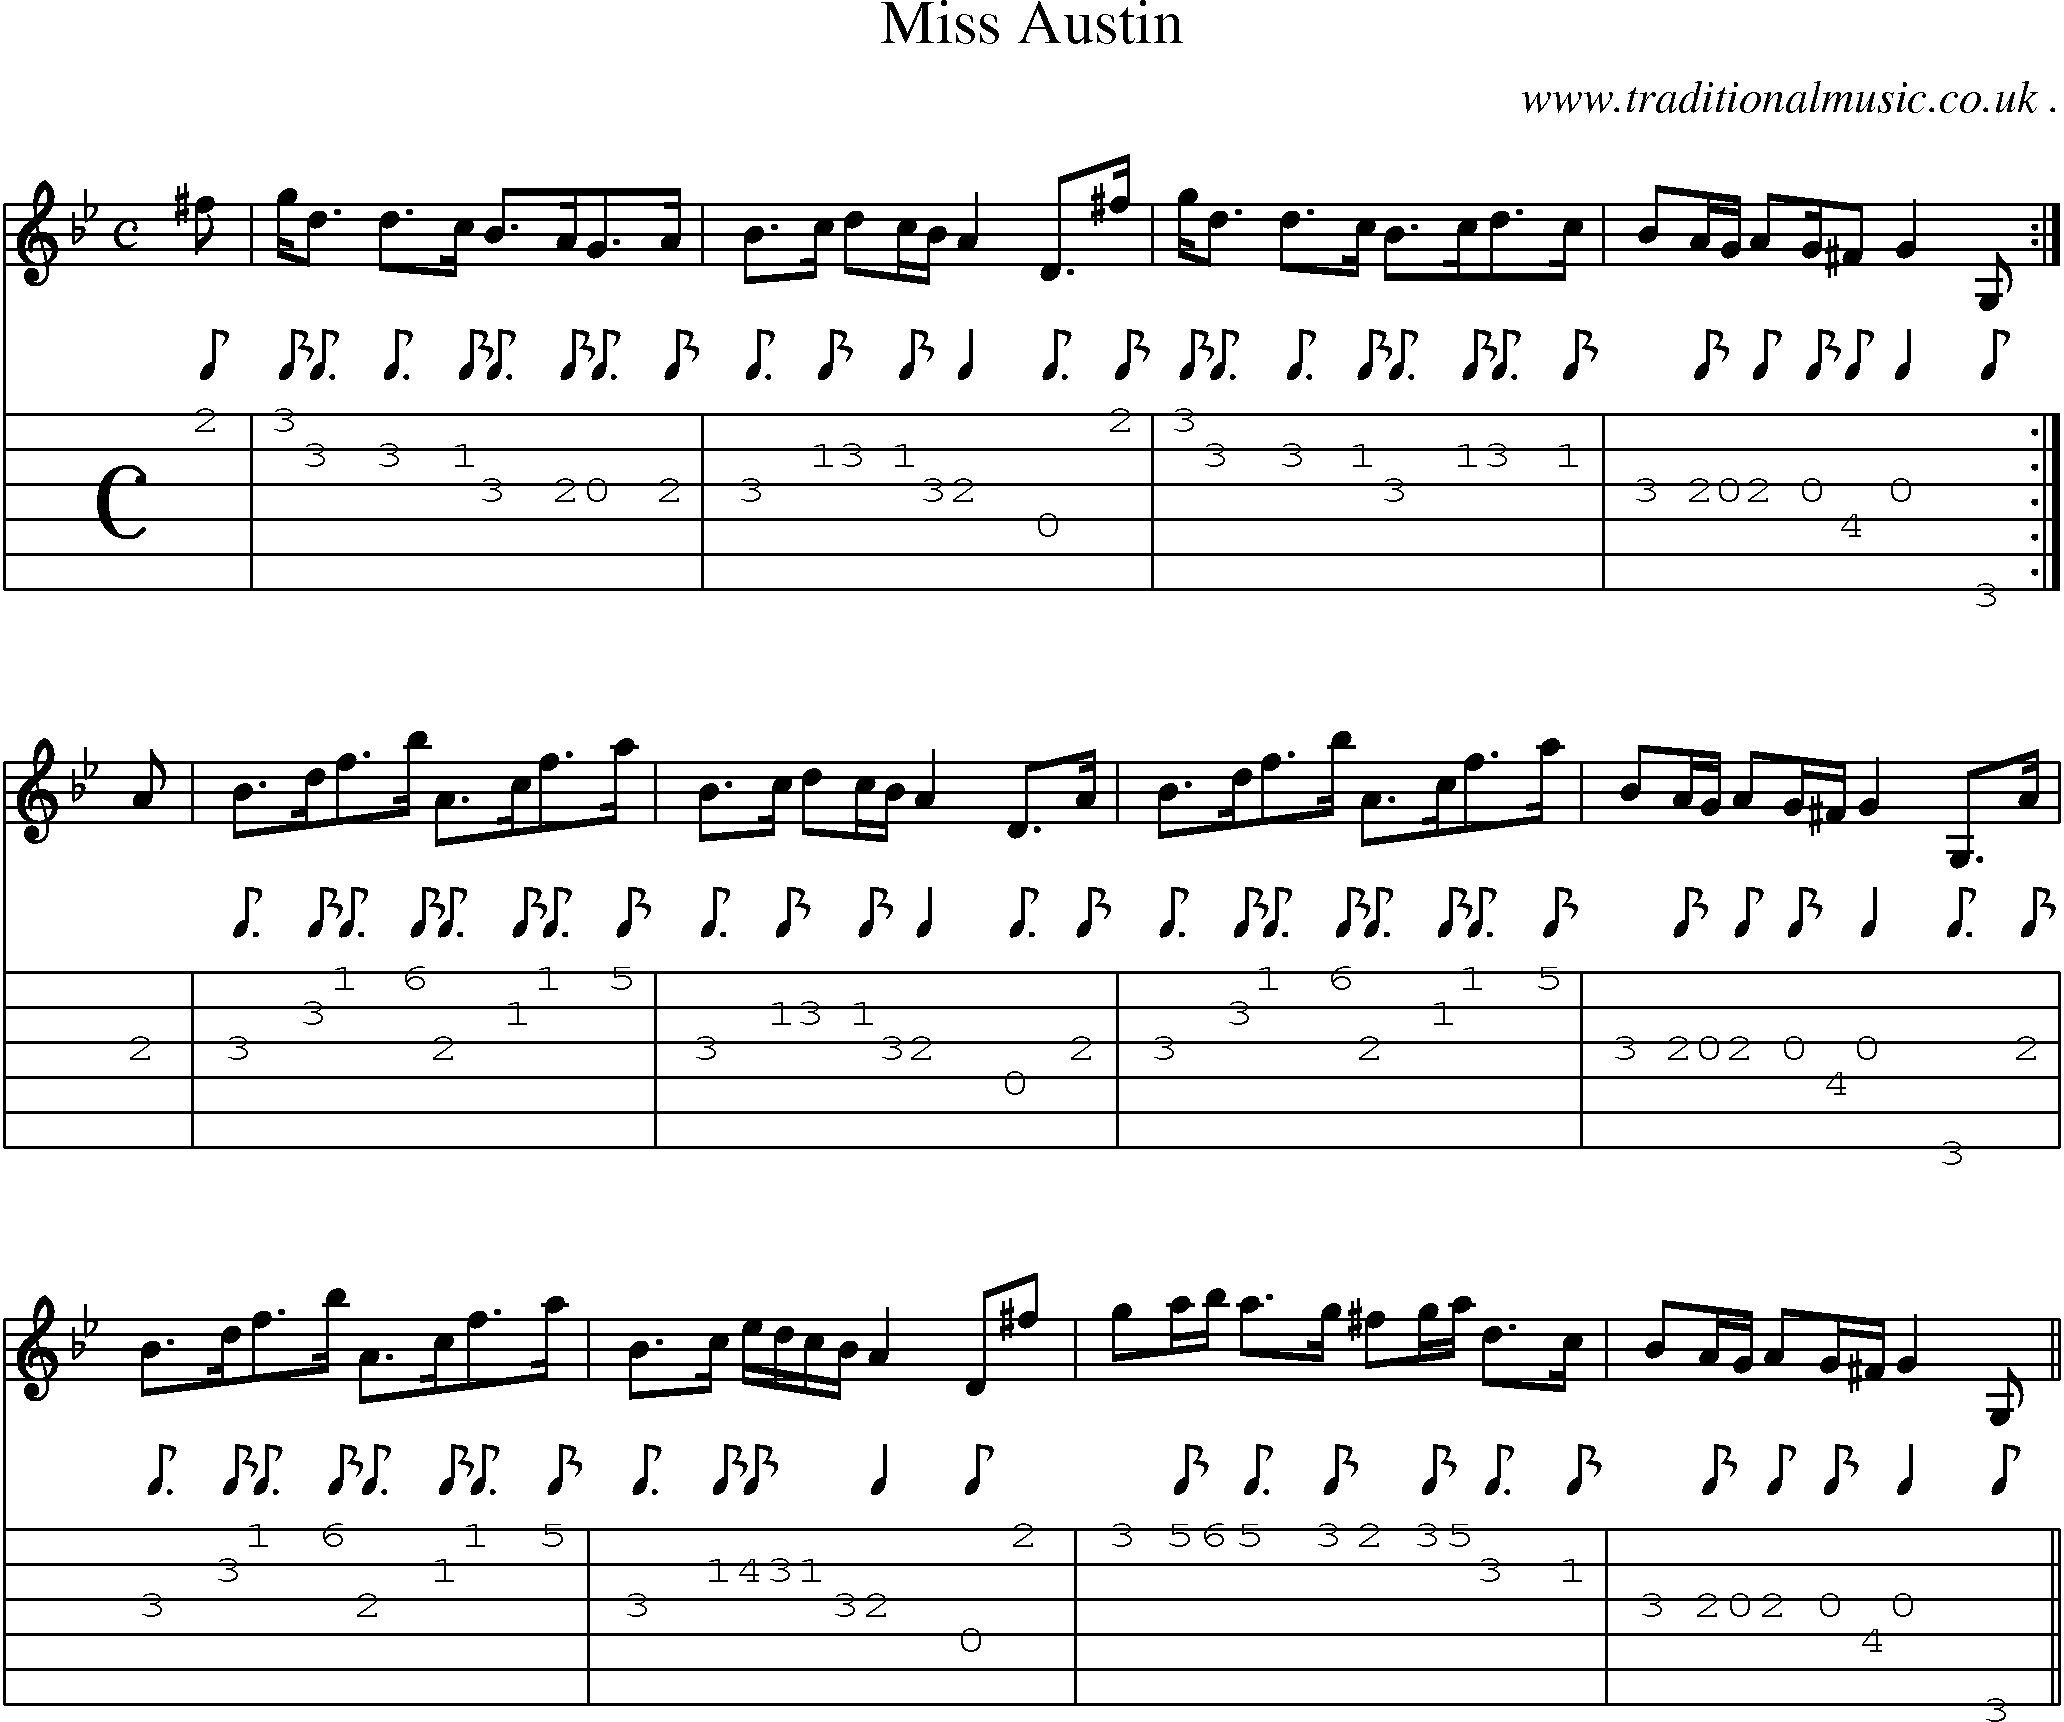 Sheet-music  score, Chords and Guitar Tabs for Miss Austin